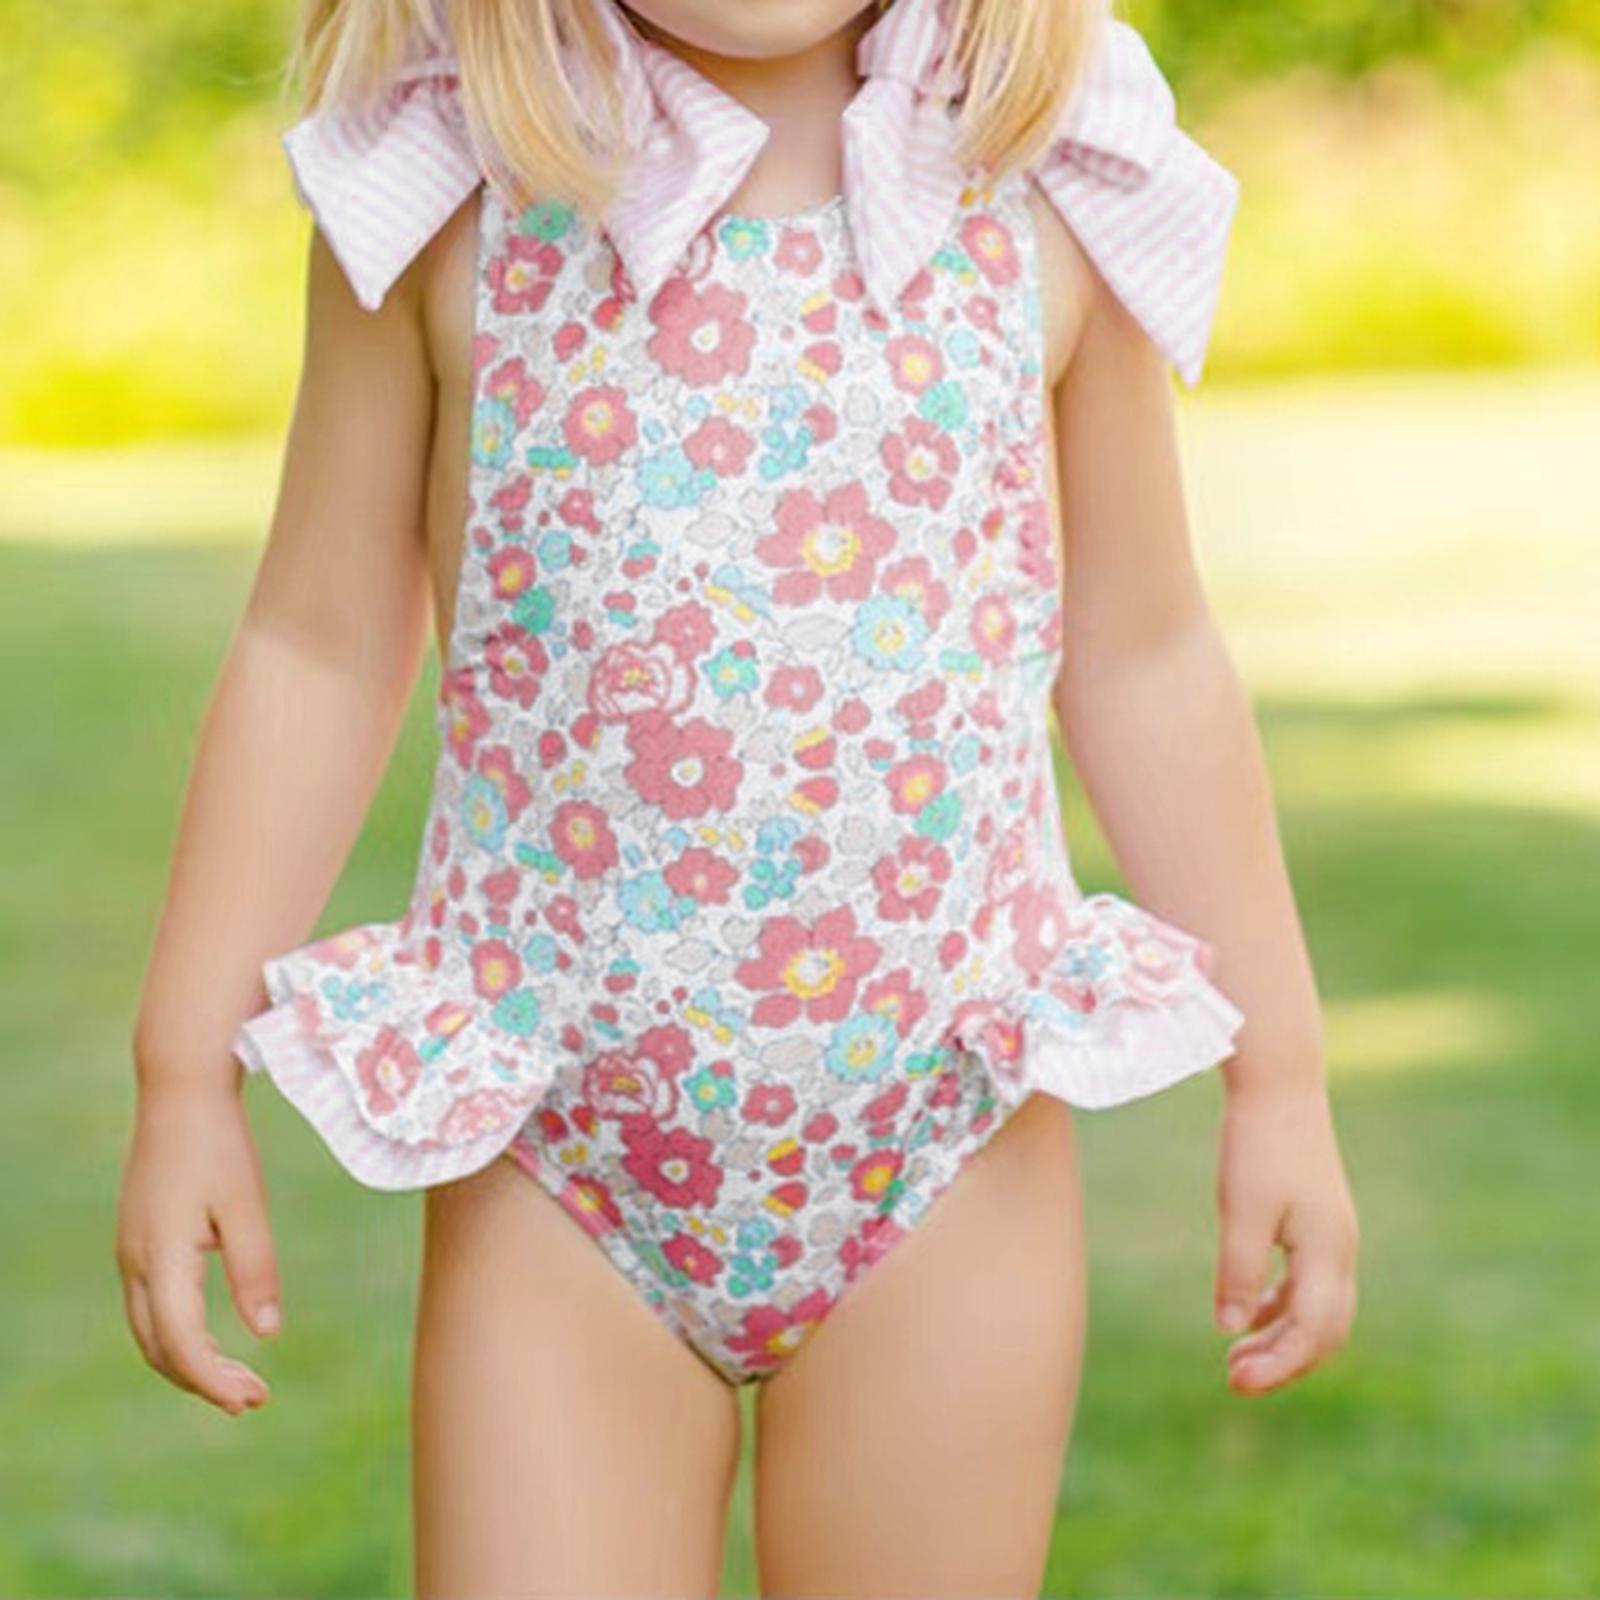 Little Fashionistas Kids Baby Girls Summer Swimsuit, Sleeveless Cross Backless Floral Print Ruffle Bathing Suit 1-6 Years